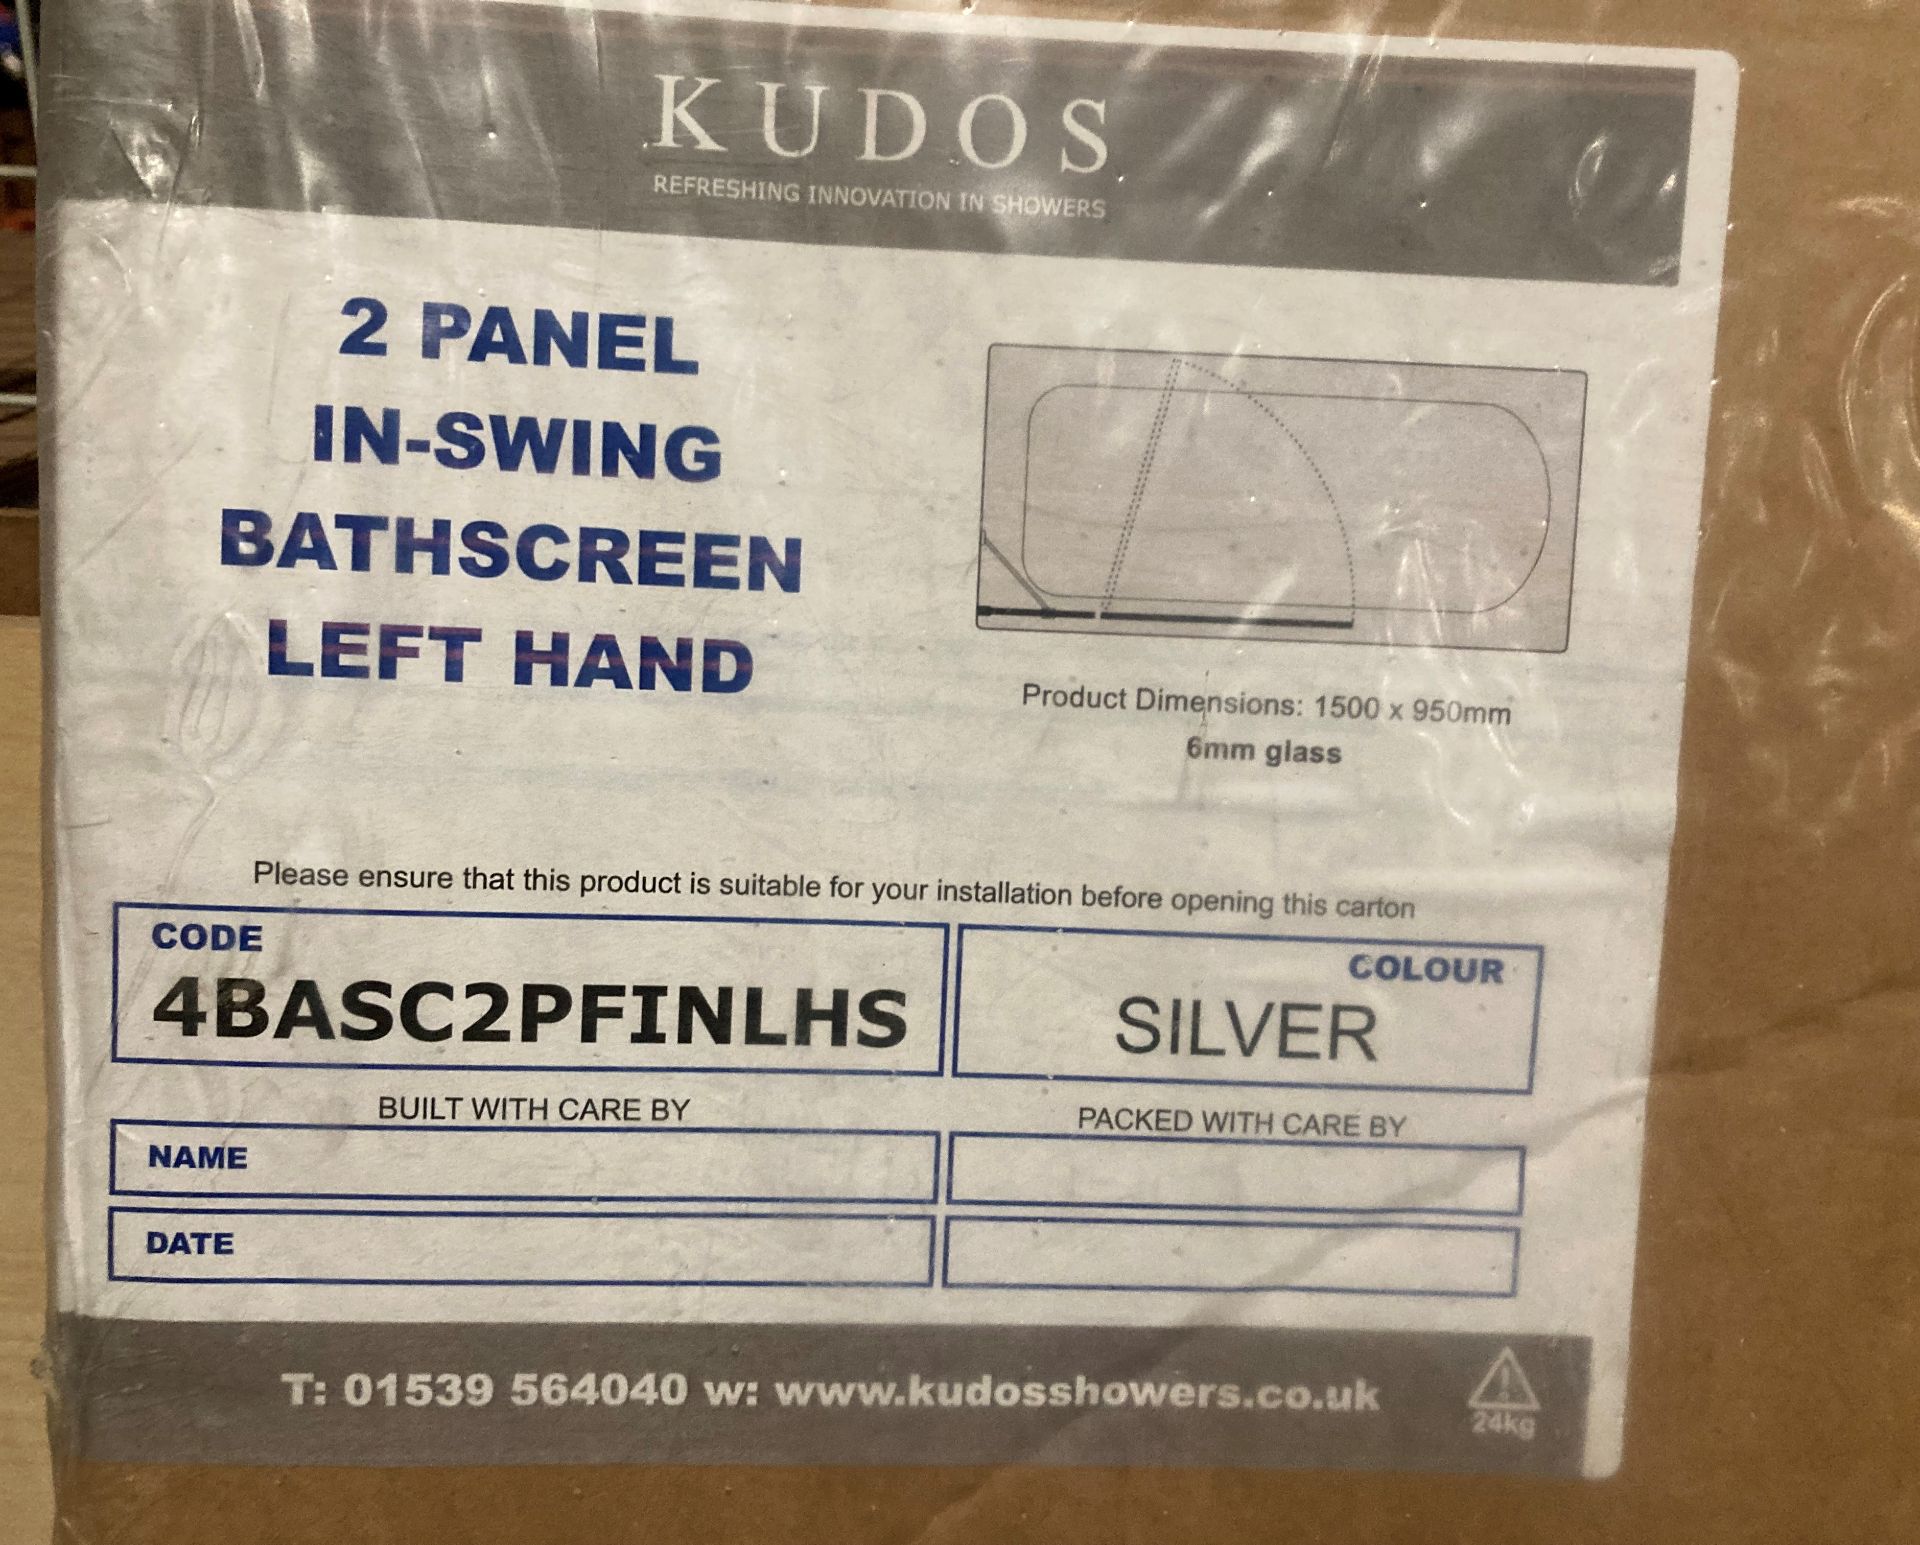 Kudos 2 panel in-swing bath screen left hand in silver 1500mm x 950mm with 6mm glass - new boxed - Image 2 of 2